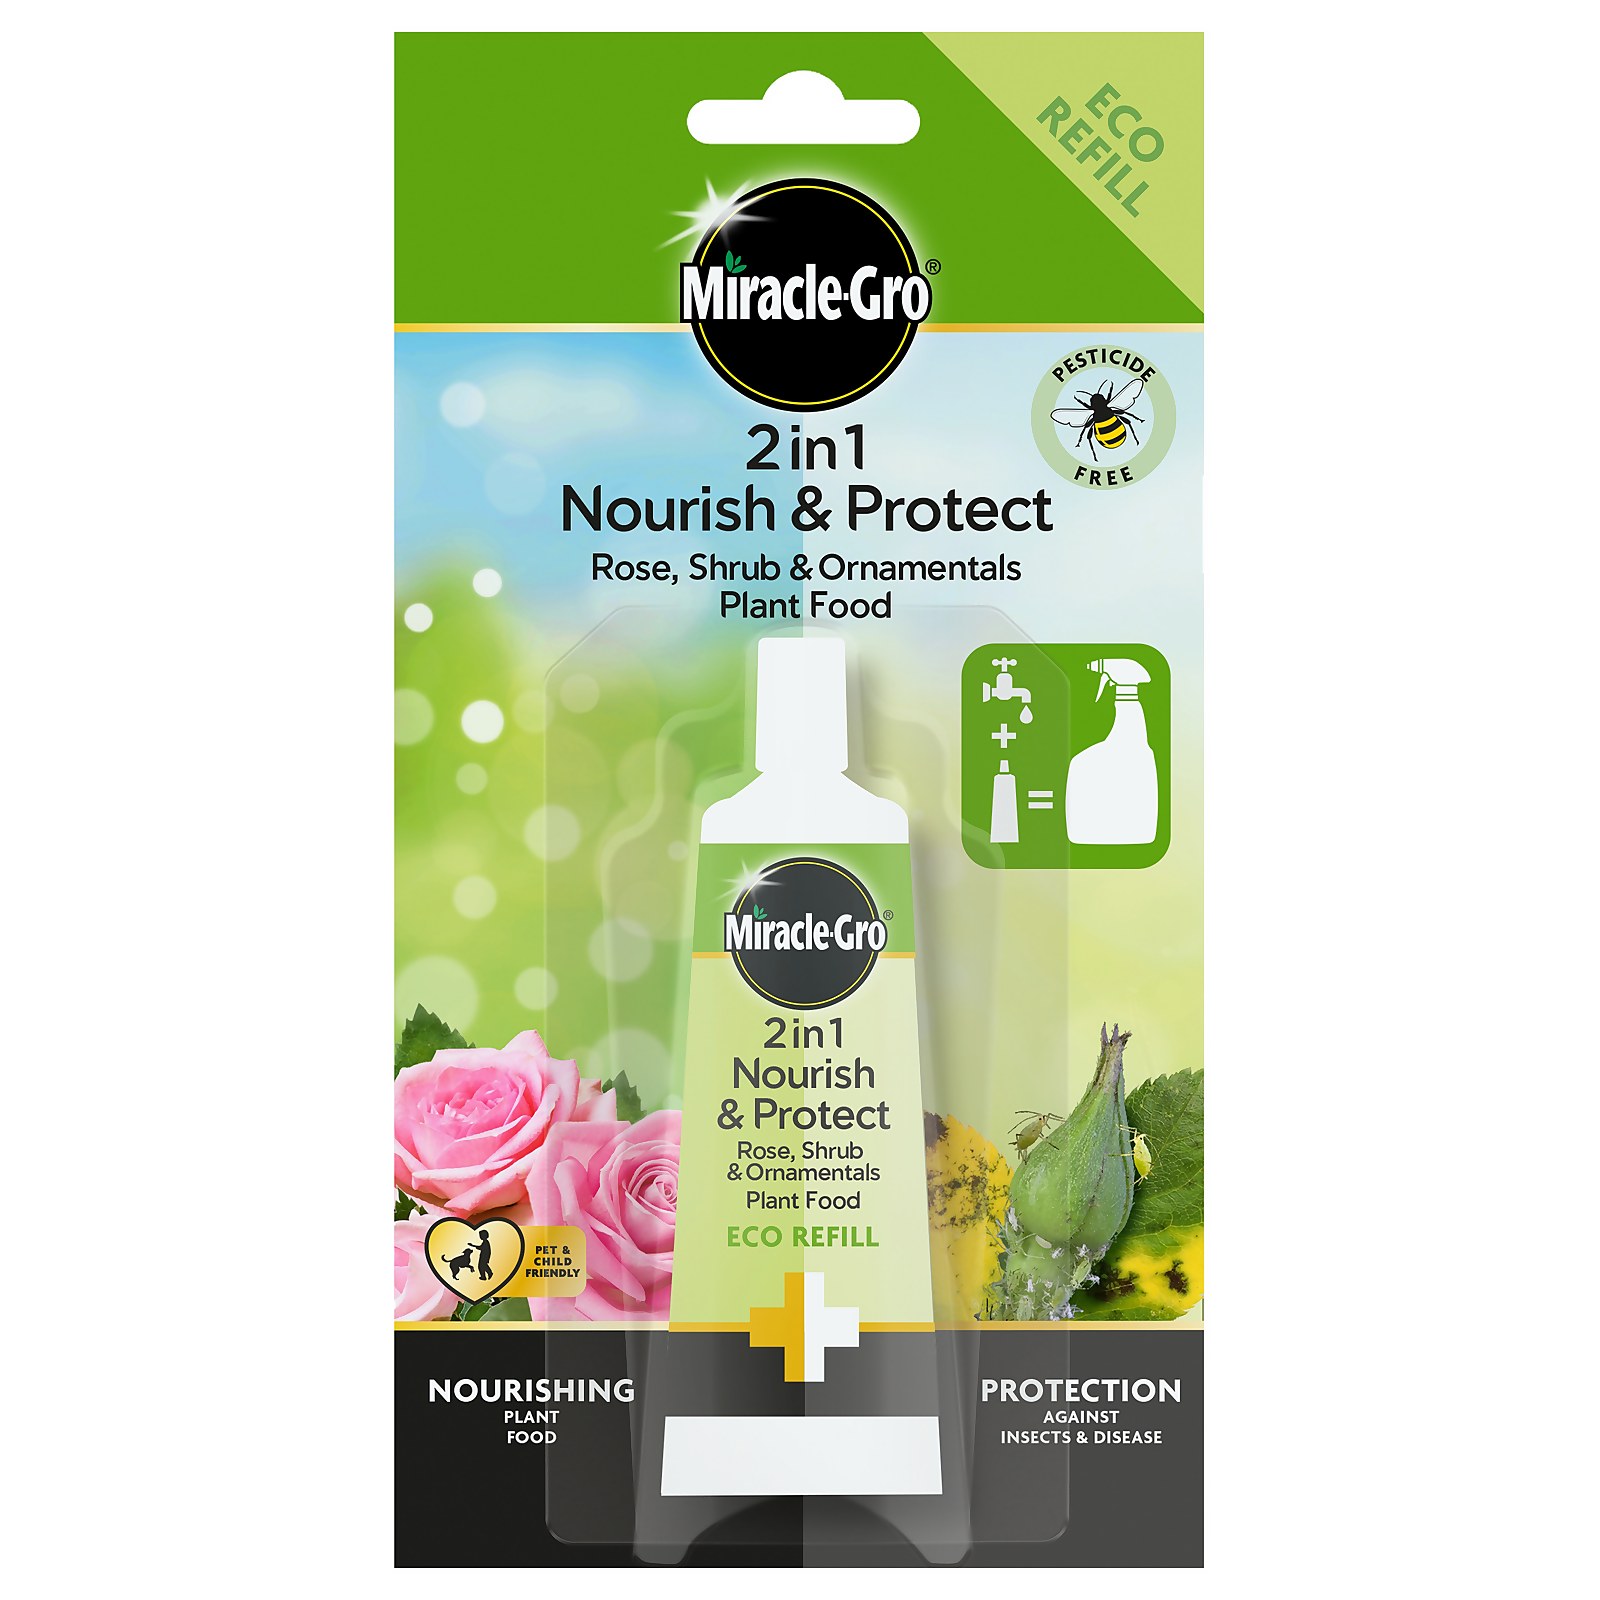 Miracle-Gro® 2 in 1 Nourish & Protect Rose, Shrub & Ornamental Plant Food Eco-Refill - 24ml